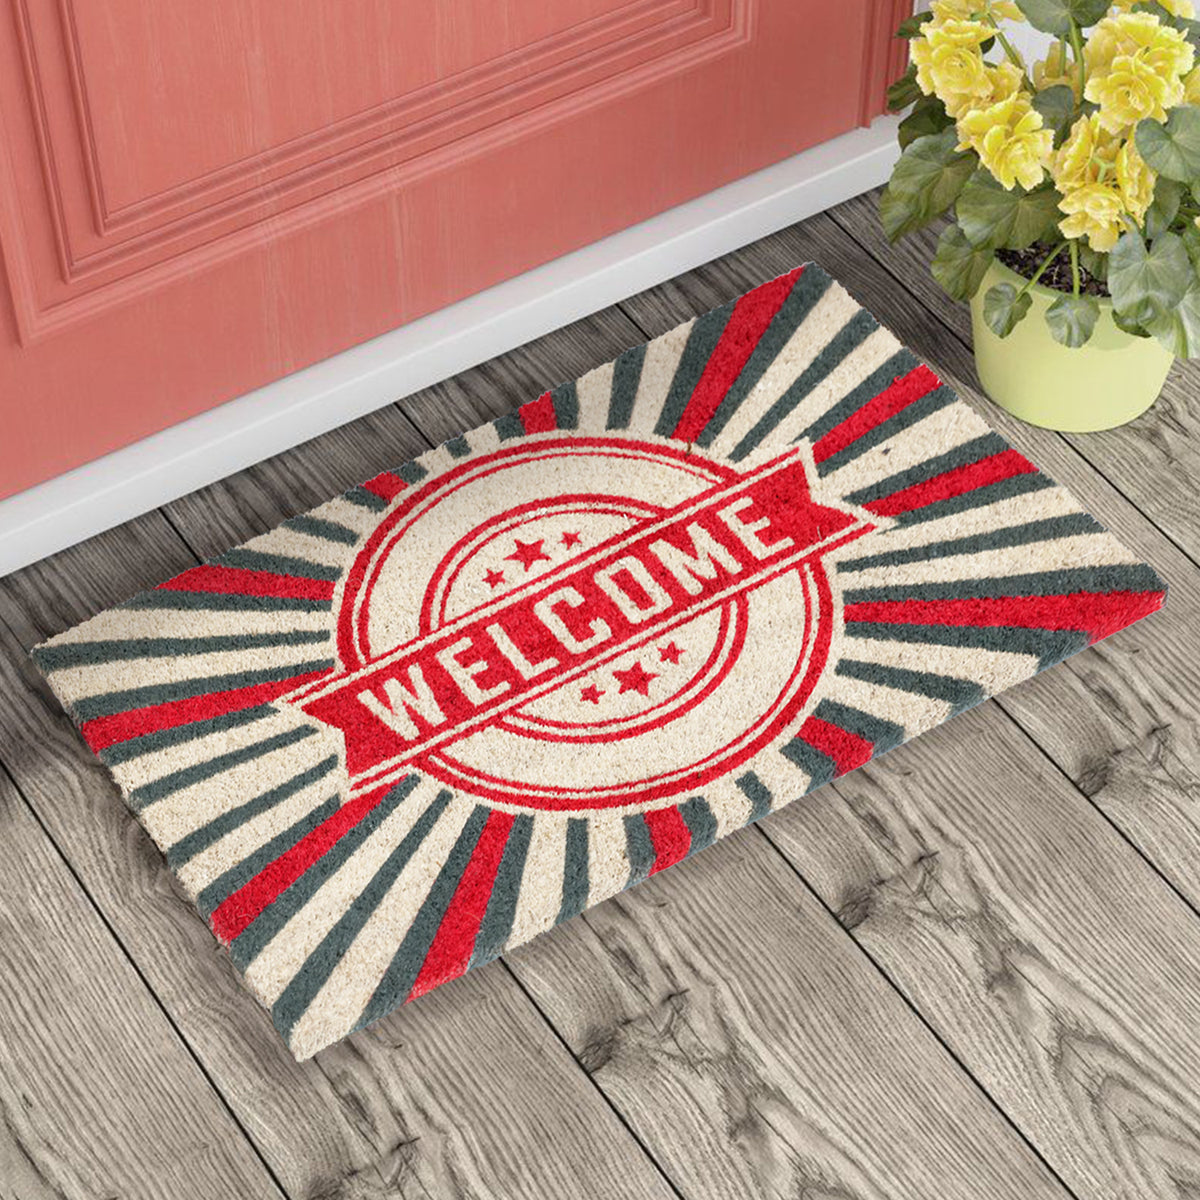 Retro WELCOME Red and Grey Printed Natural Coir Entrance Mat